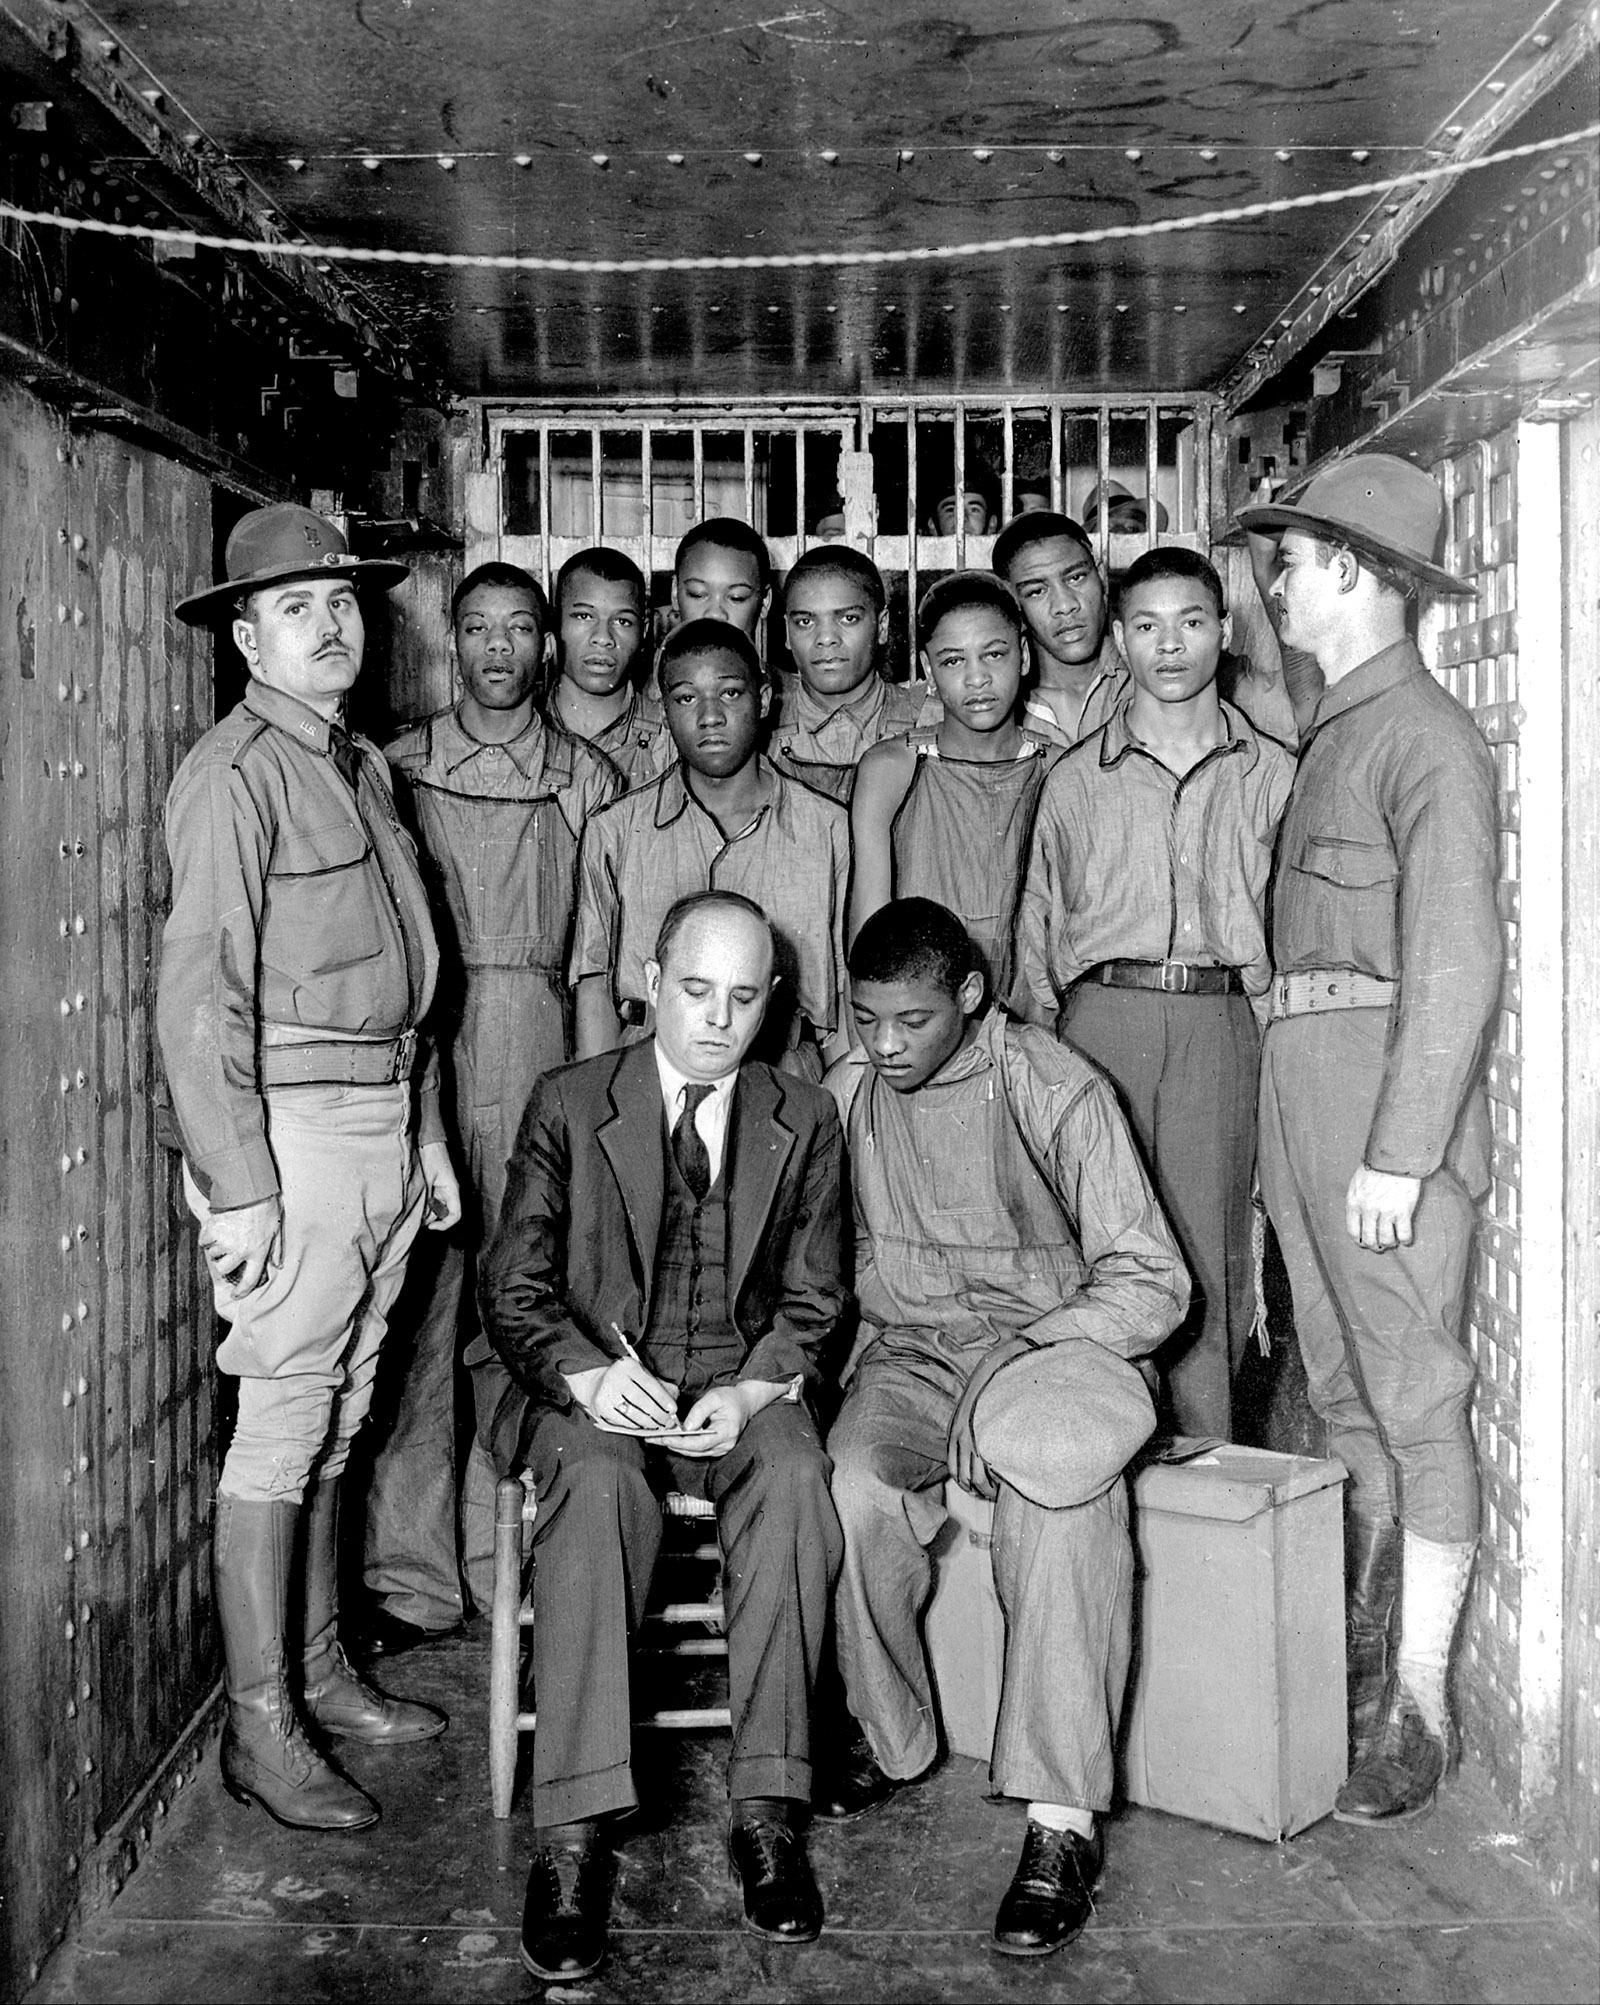 Defense attorney Samuel Leibowitz with Haywood Patterson and the other eight Scottsboro Boys, whom he represented pro bono after the US Supreme Court ruled that they had been denied the right to counsel